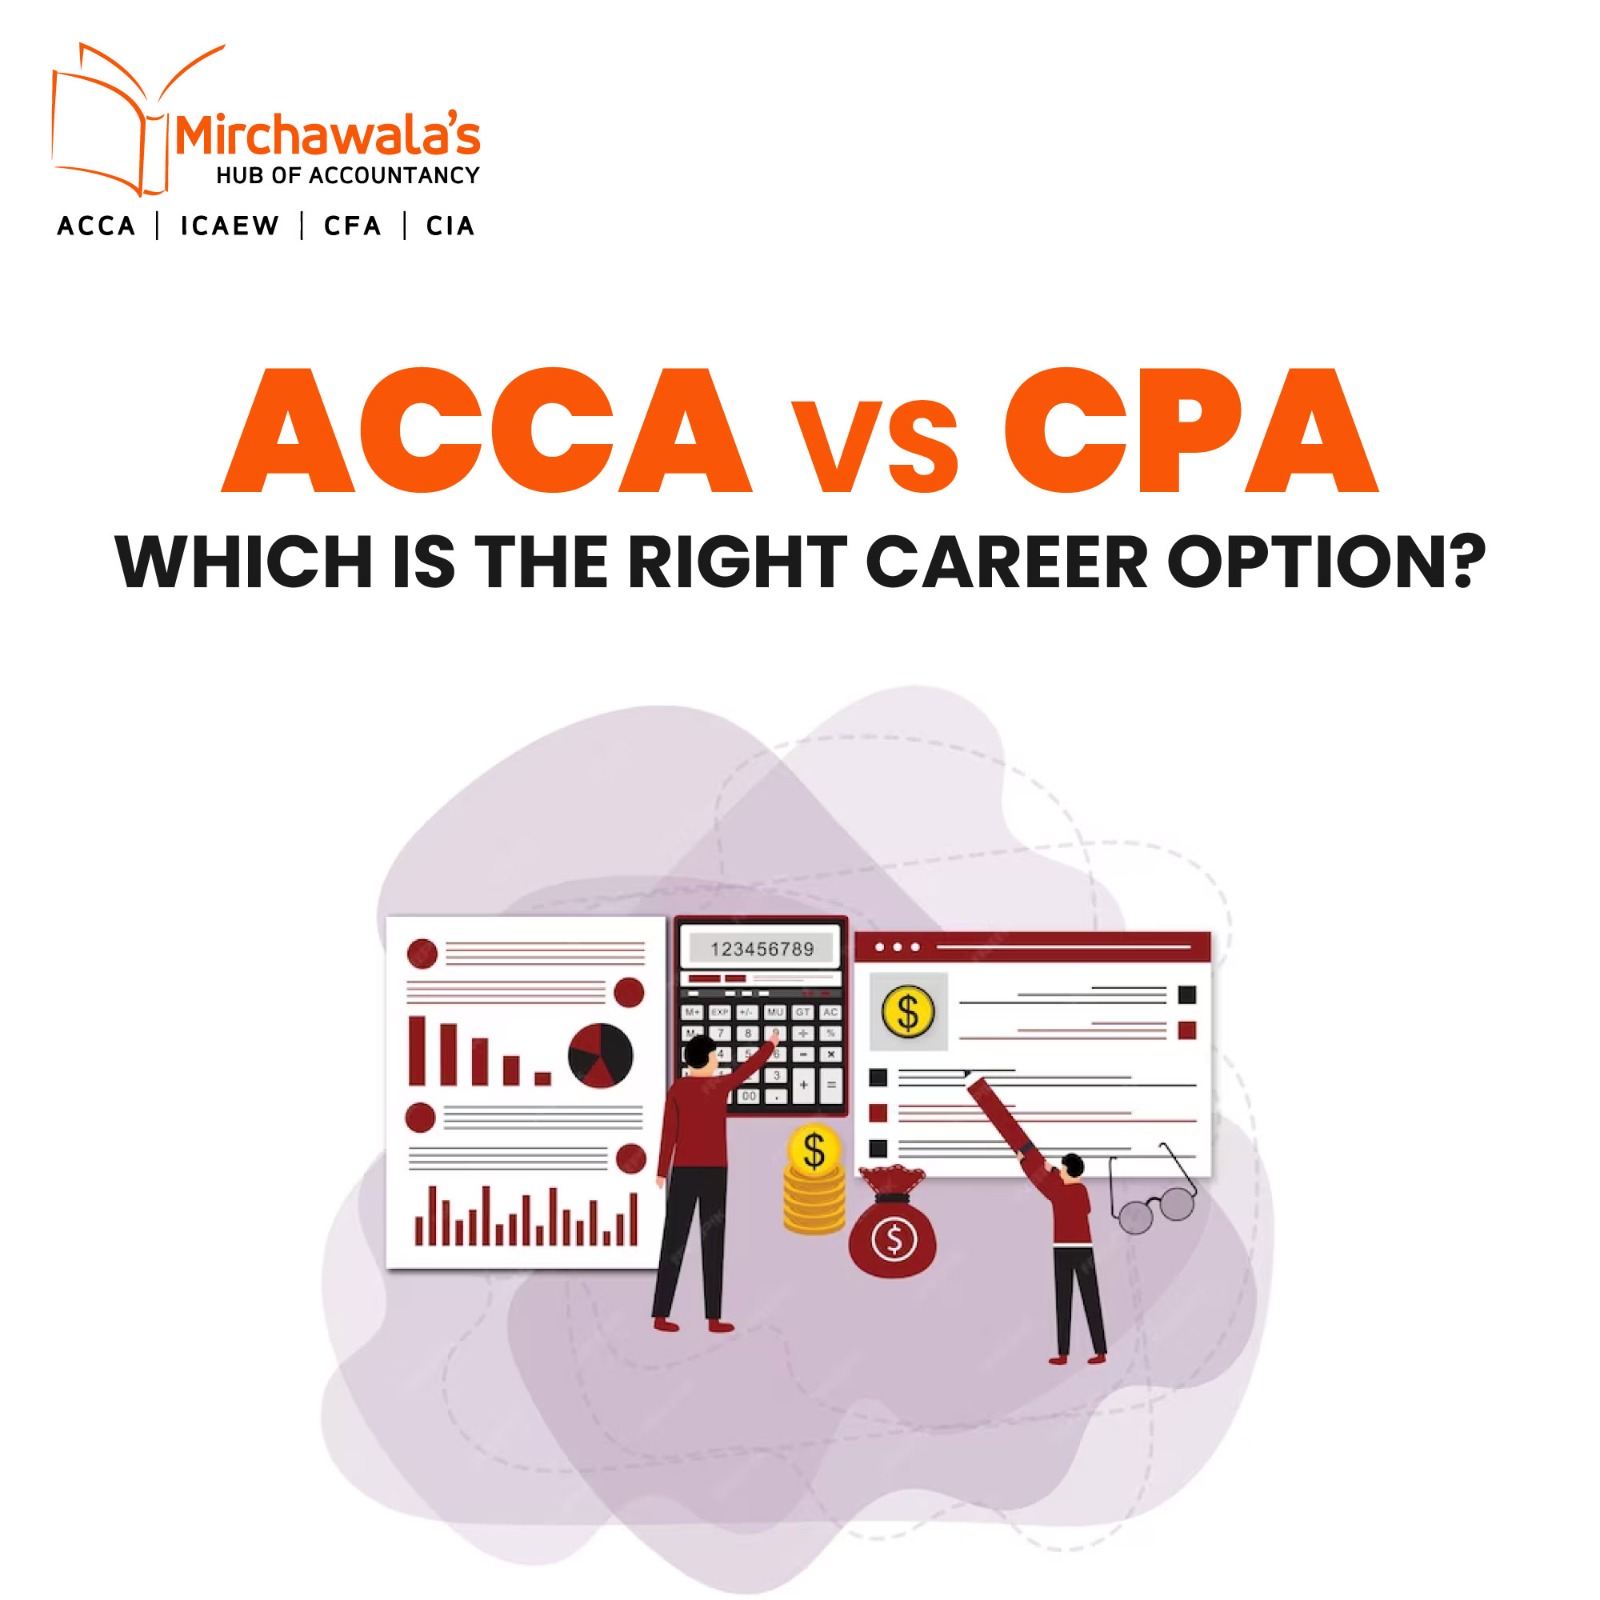 ACCA vs CPA: Which is the Right Career Option?